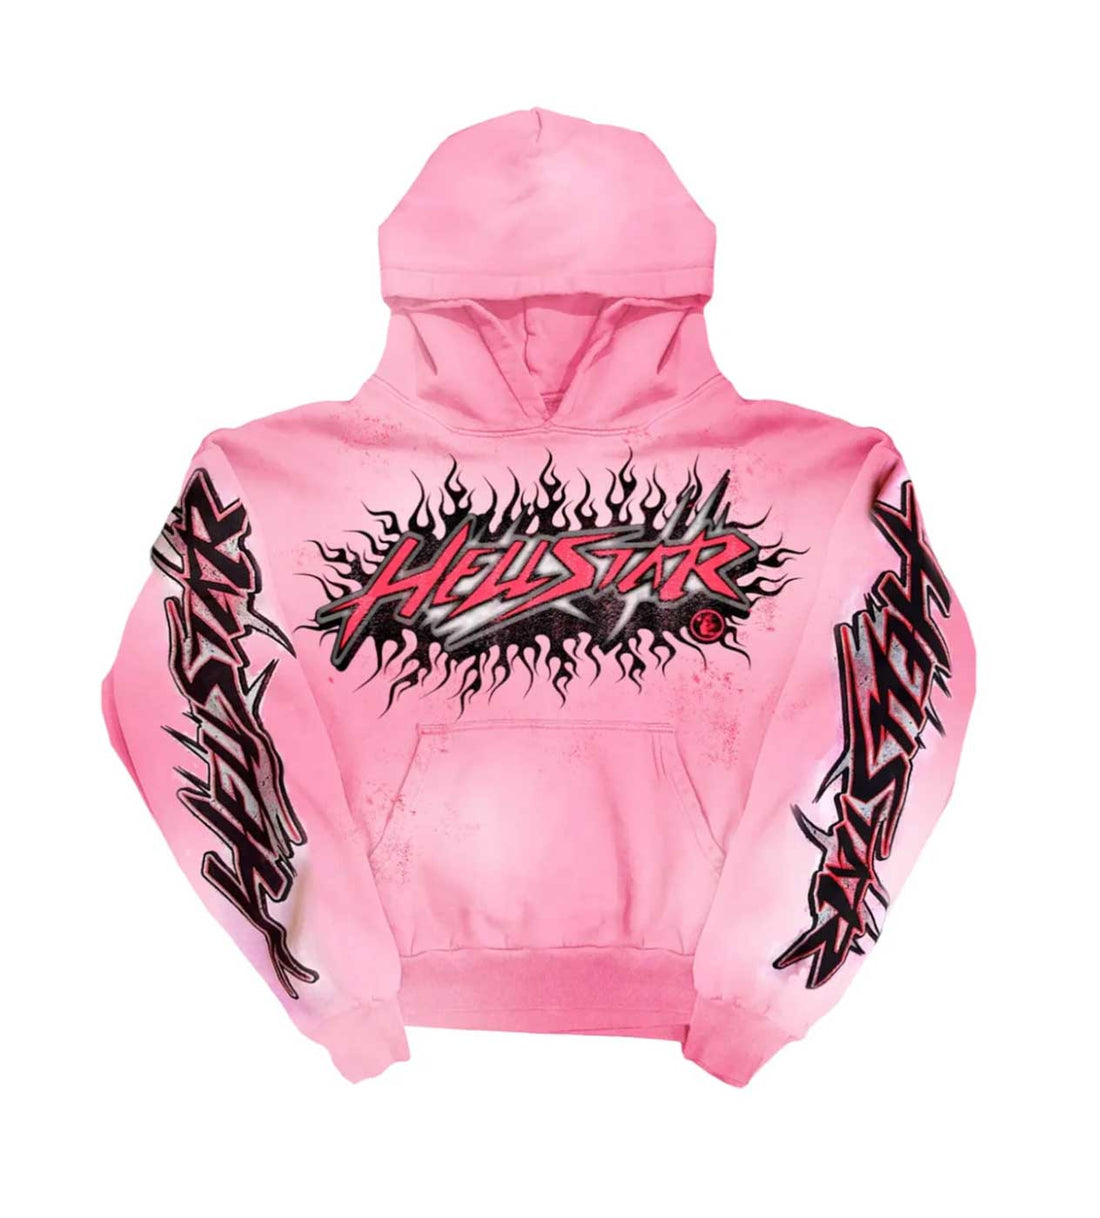 Product Image Of Hellstar Brainwashed Hoodie Pink (Without Brain)  Front View